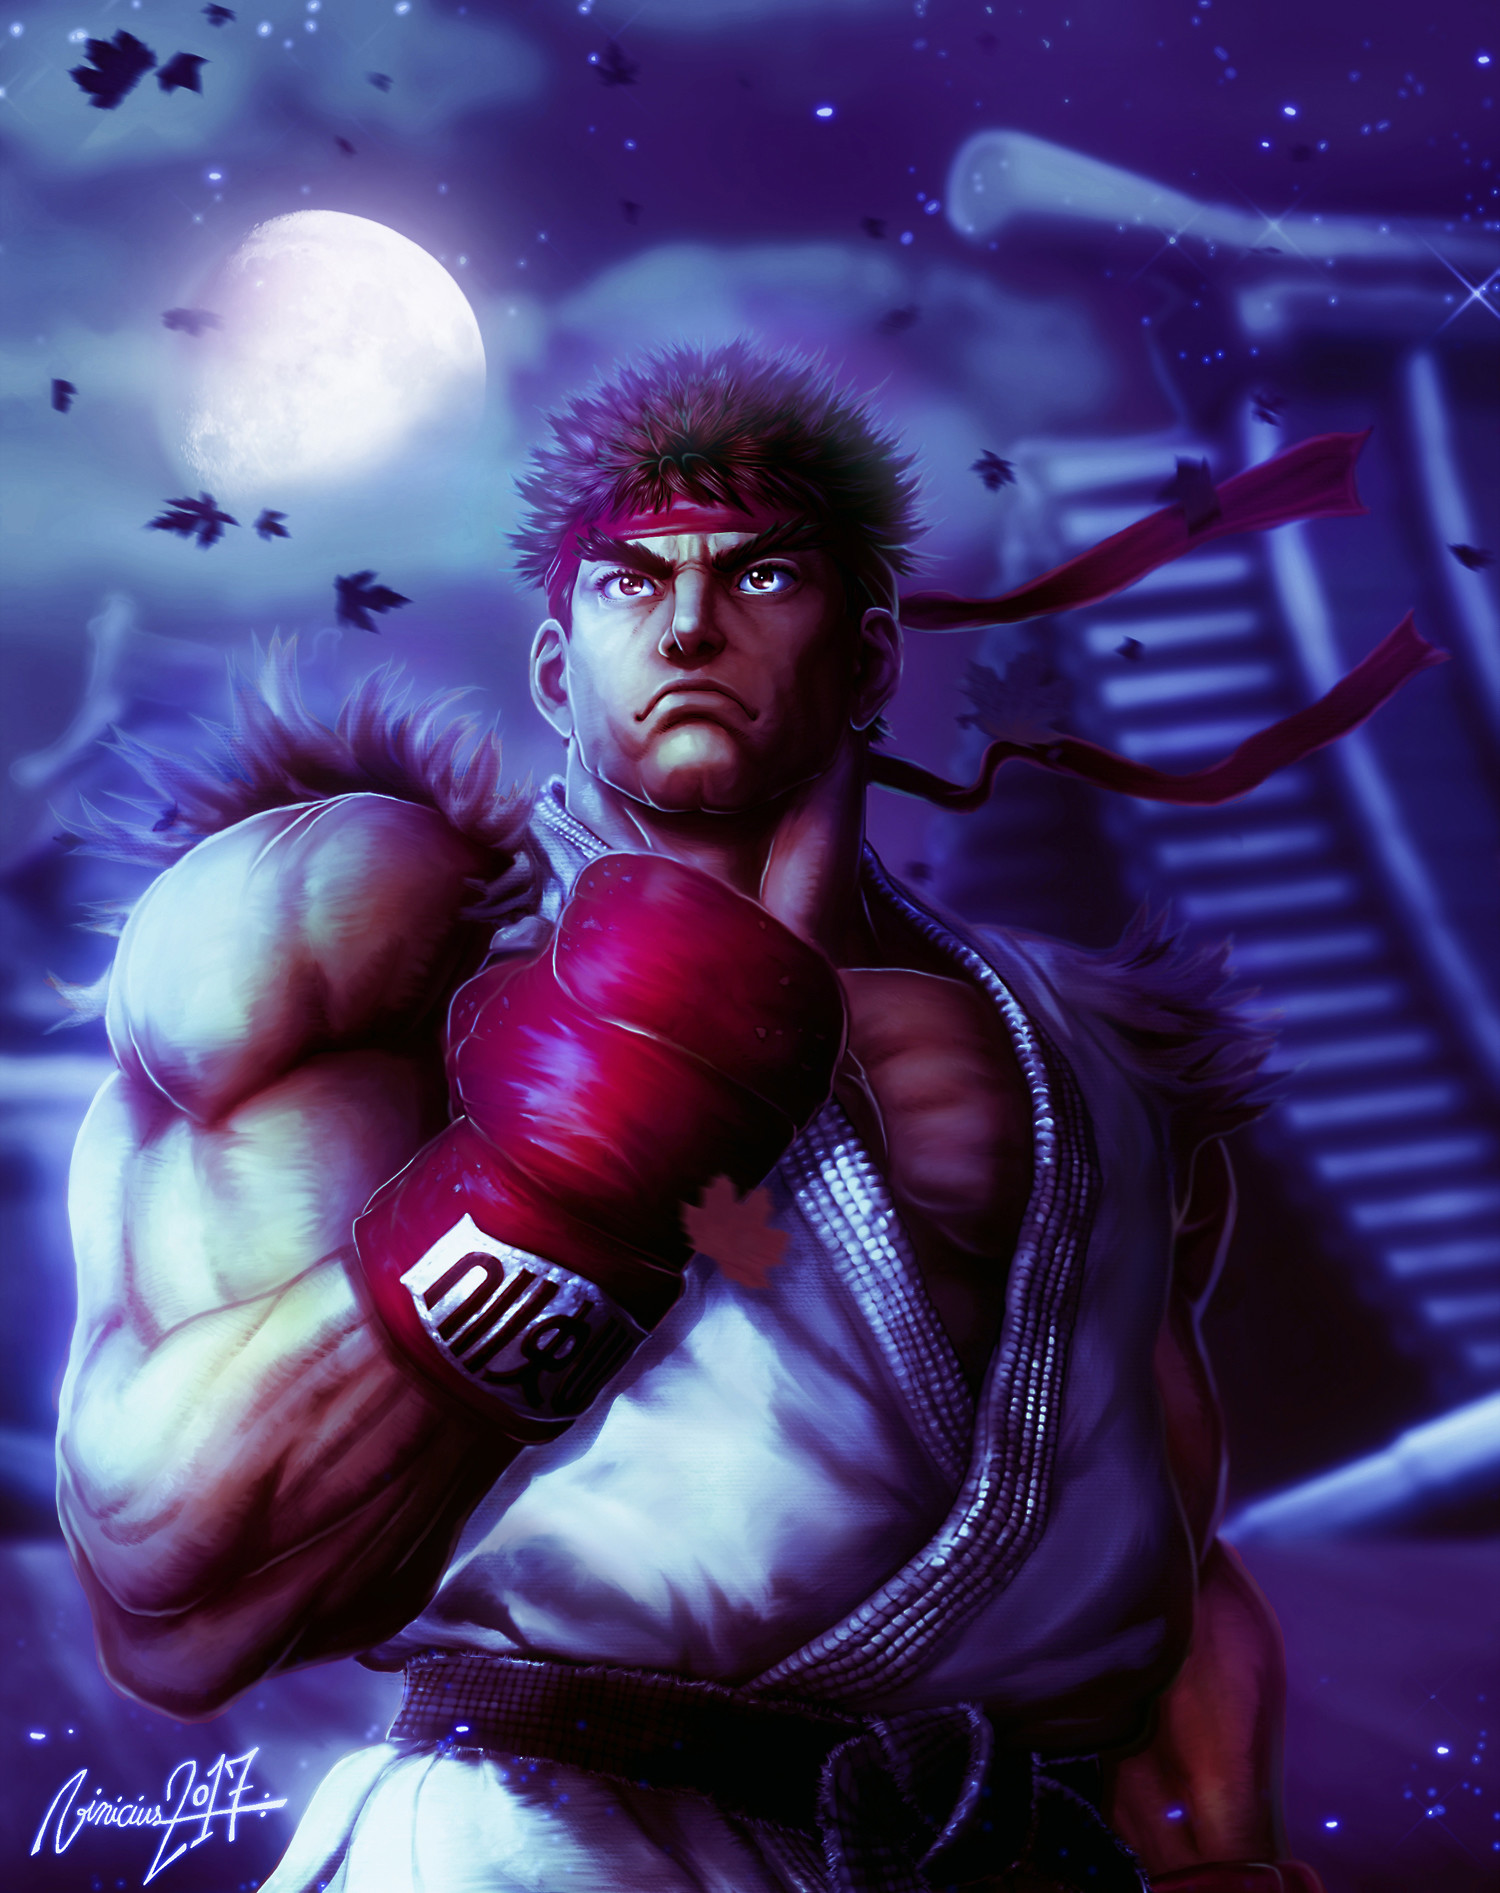 Ryu street fighter remake by Vinicius Moura by viniciusmt2007 on